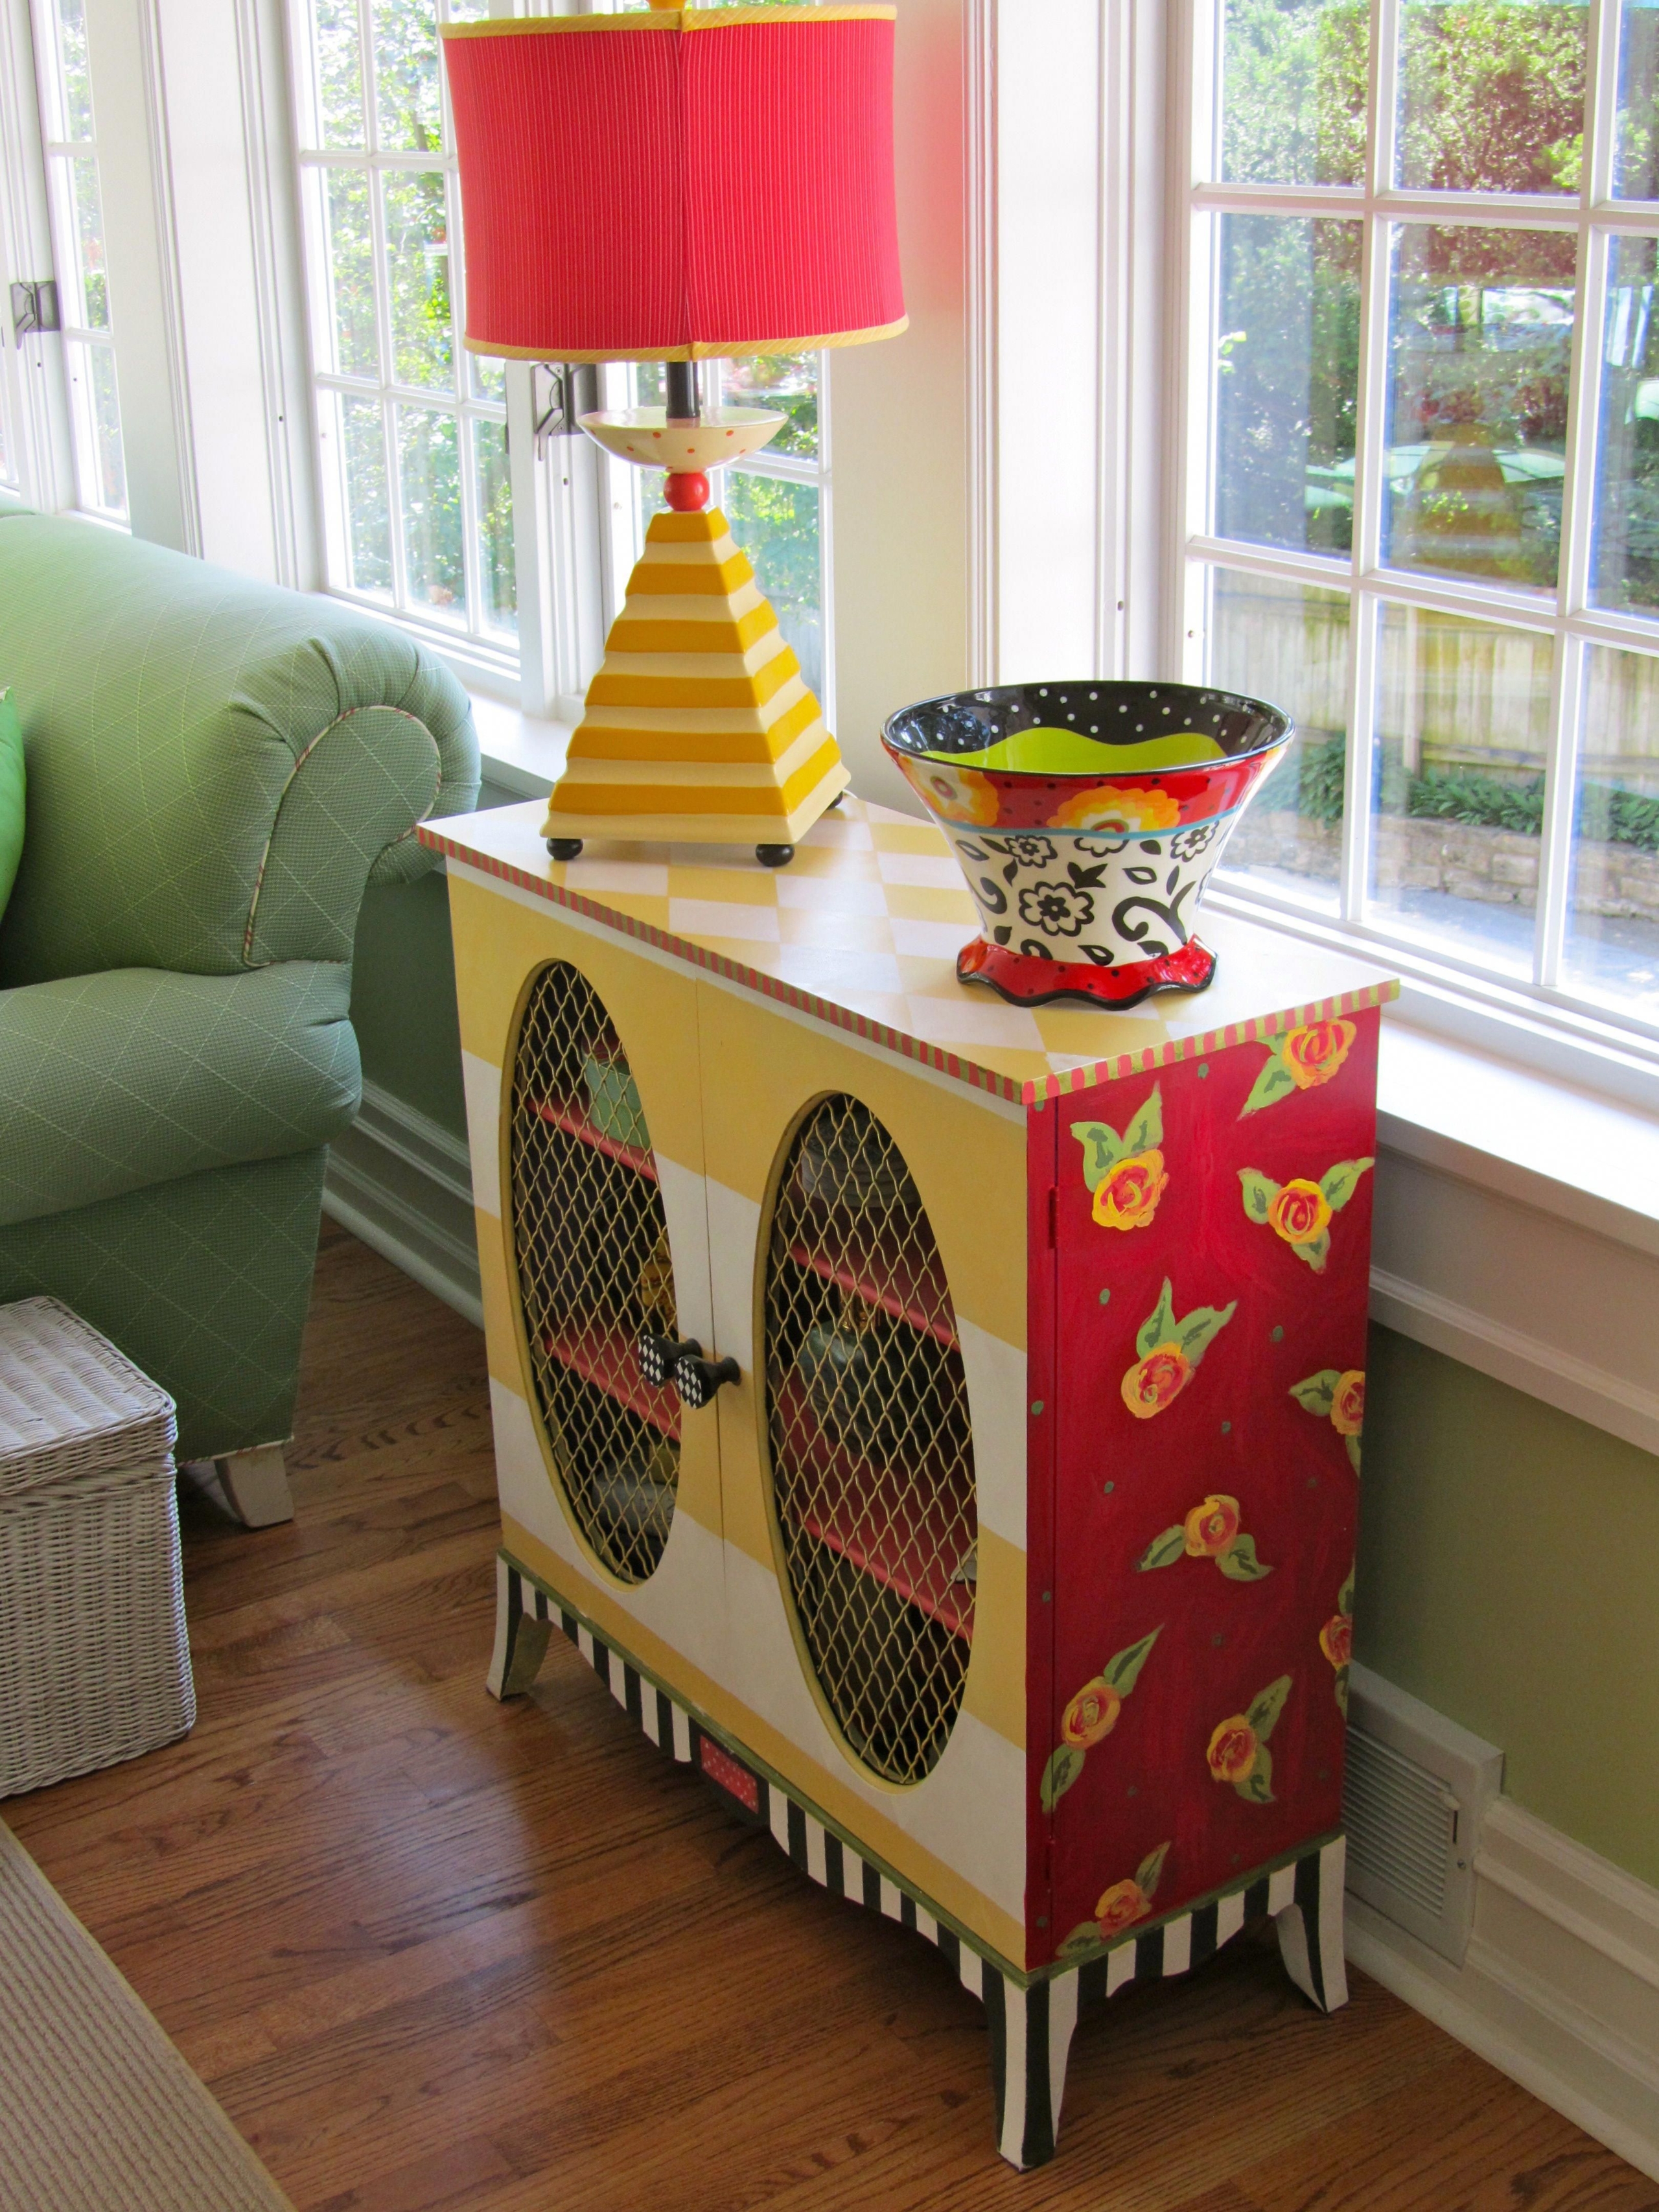 Adorable hand painted cabinet by be colorful